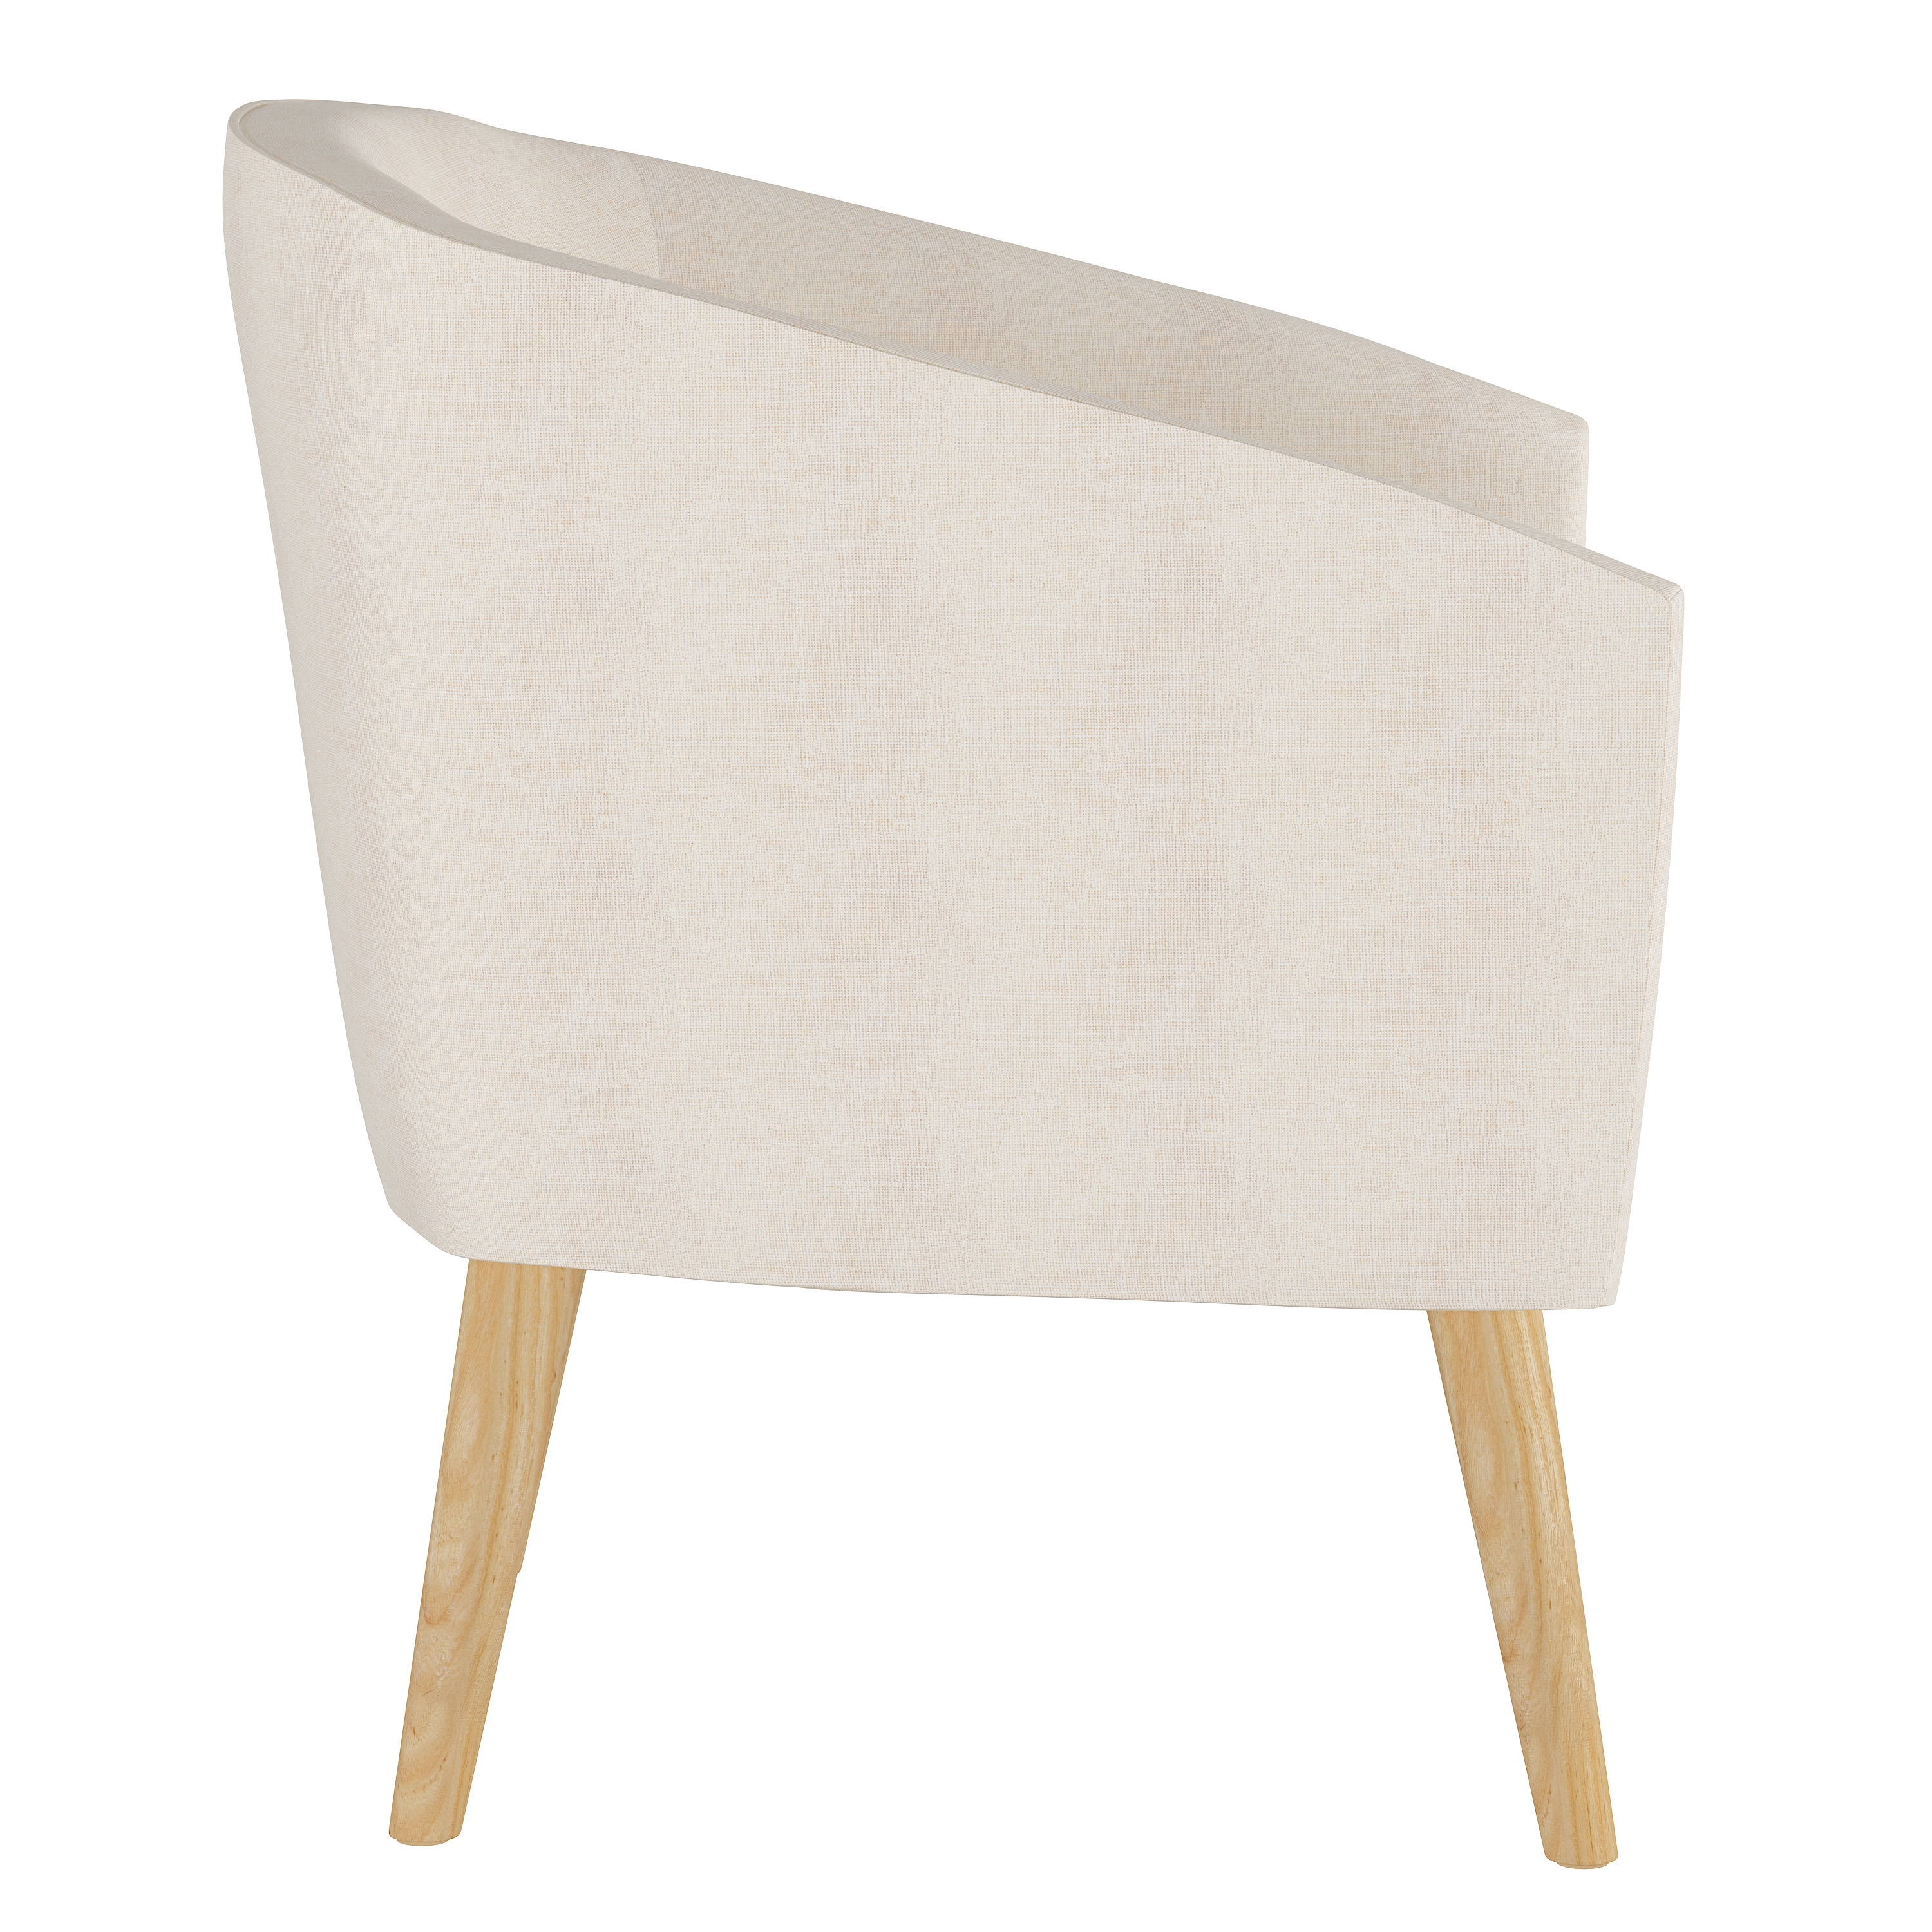 Dexter Chair, White - Image 2